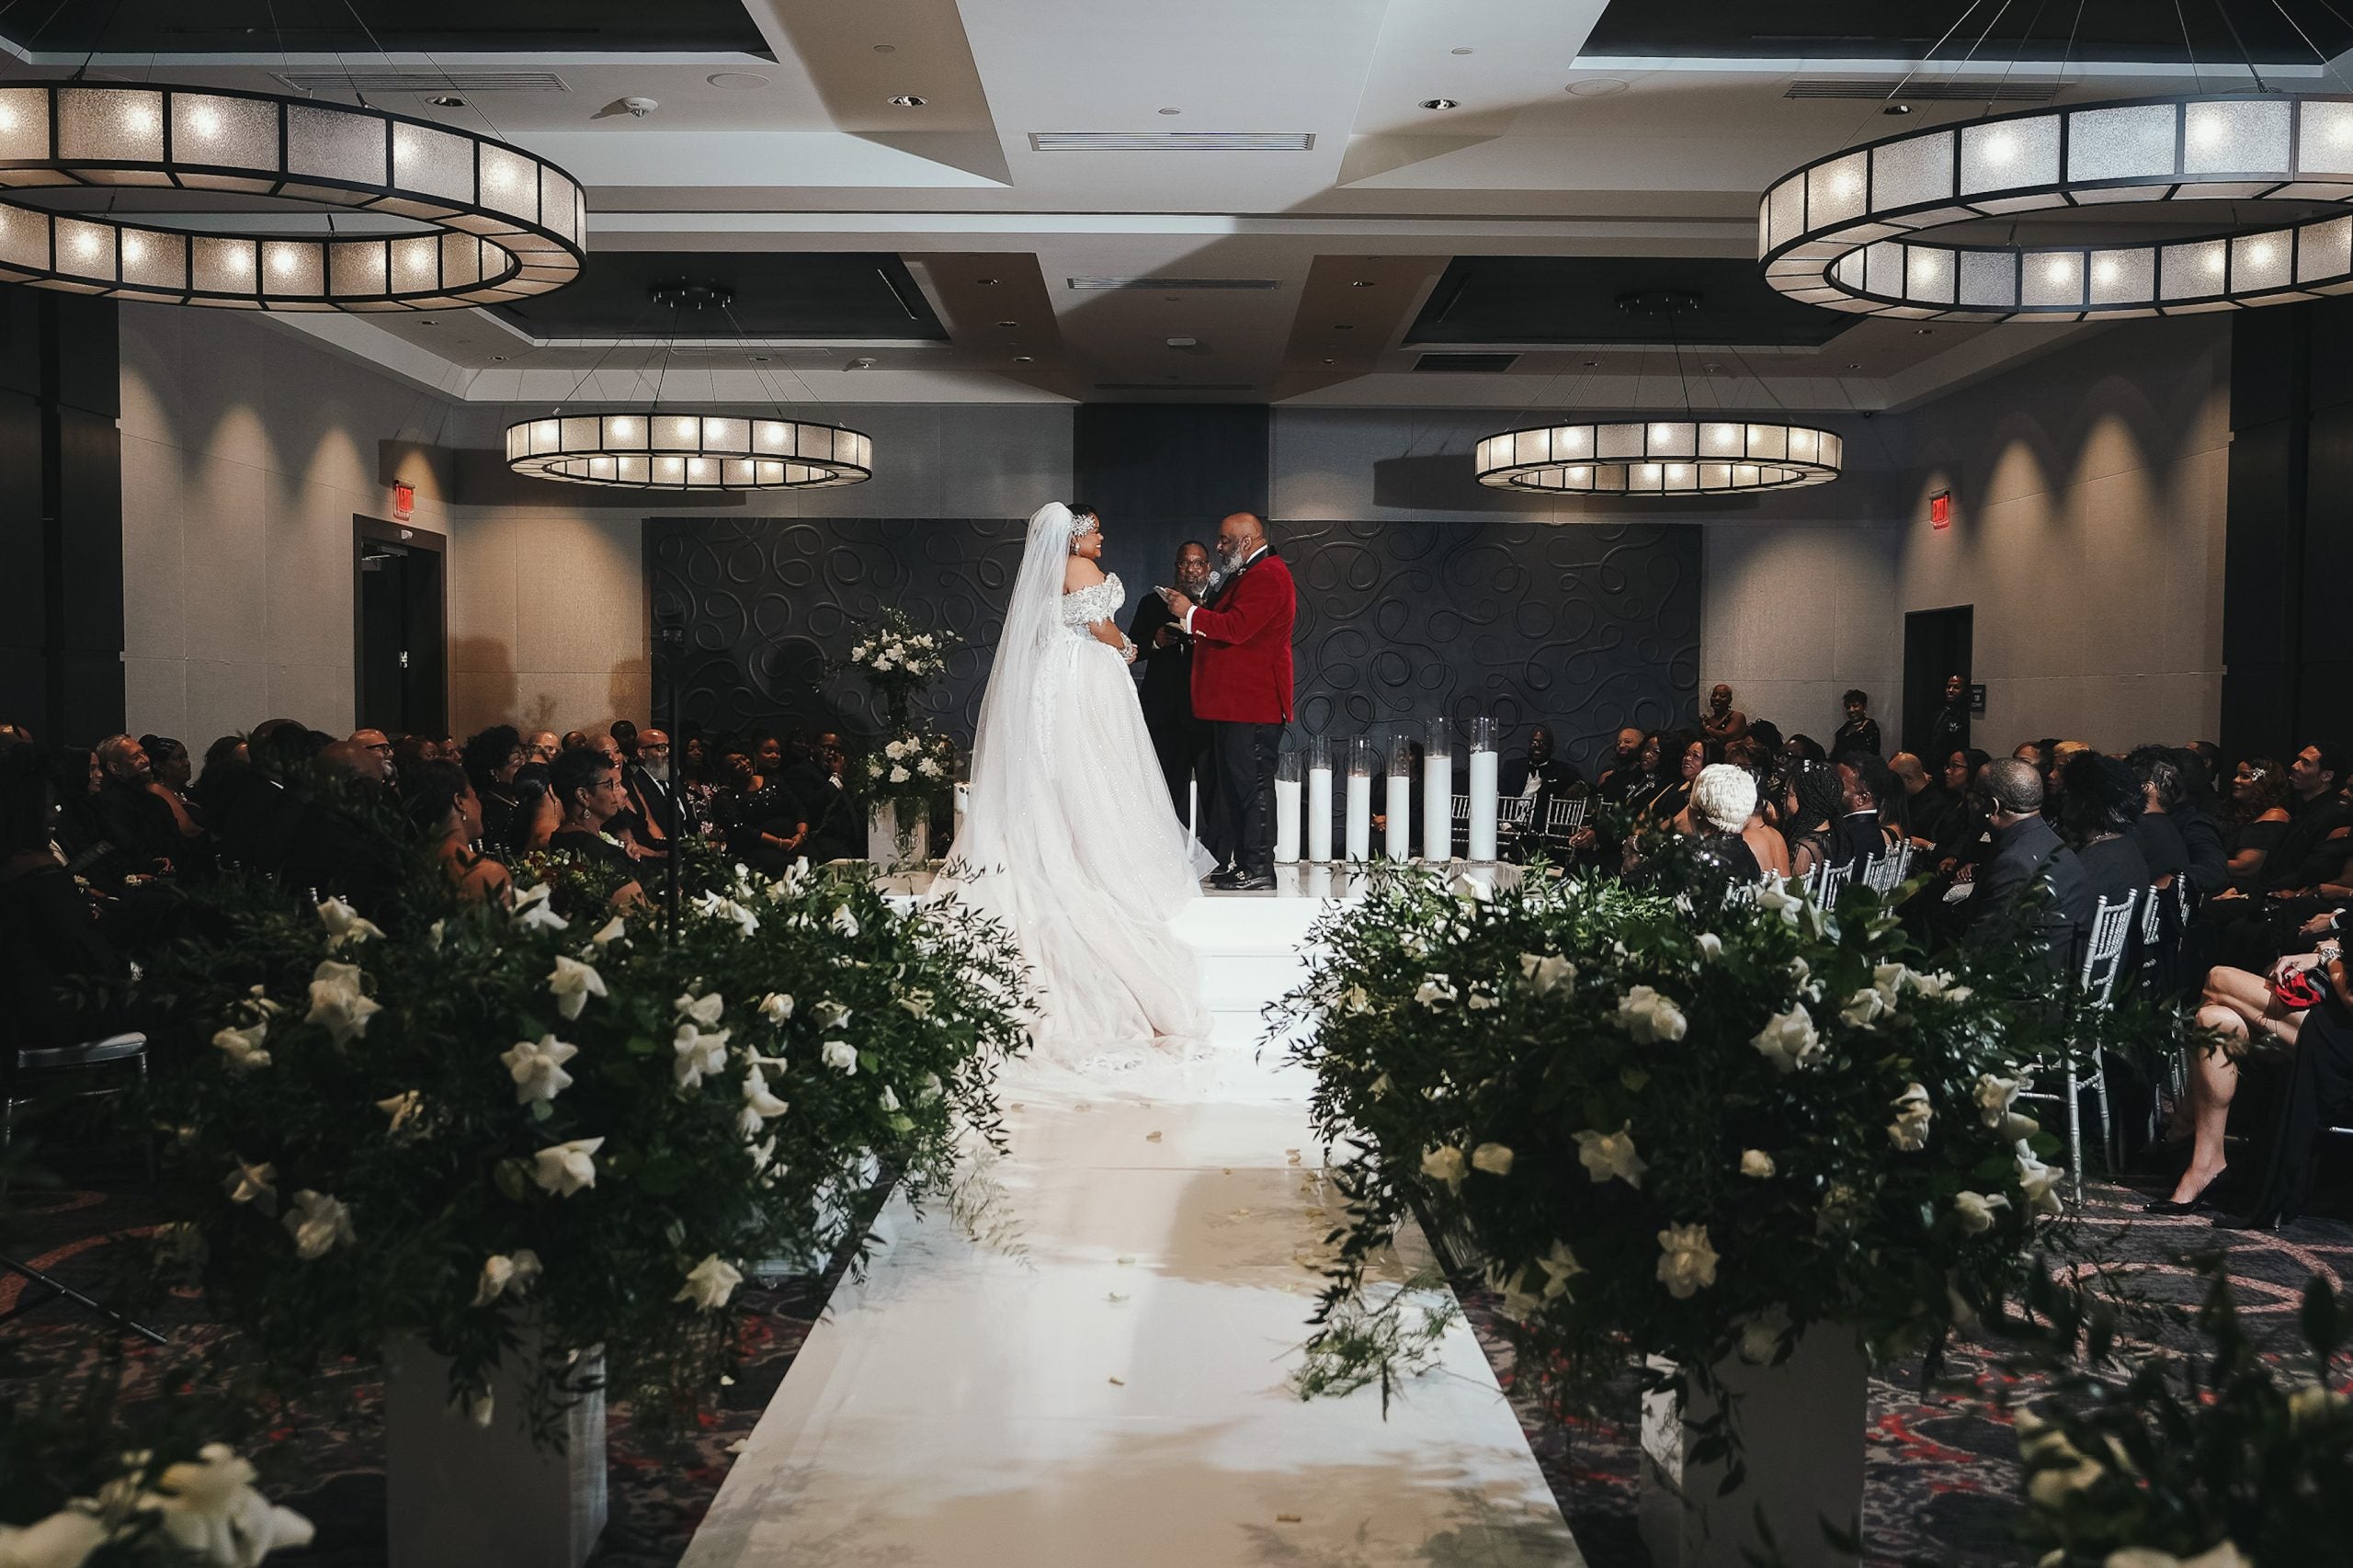 Bridal Bliss: Connie And Chip Celebrated A Second Chance At Love With A Classy Winter Wedding In Maryland